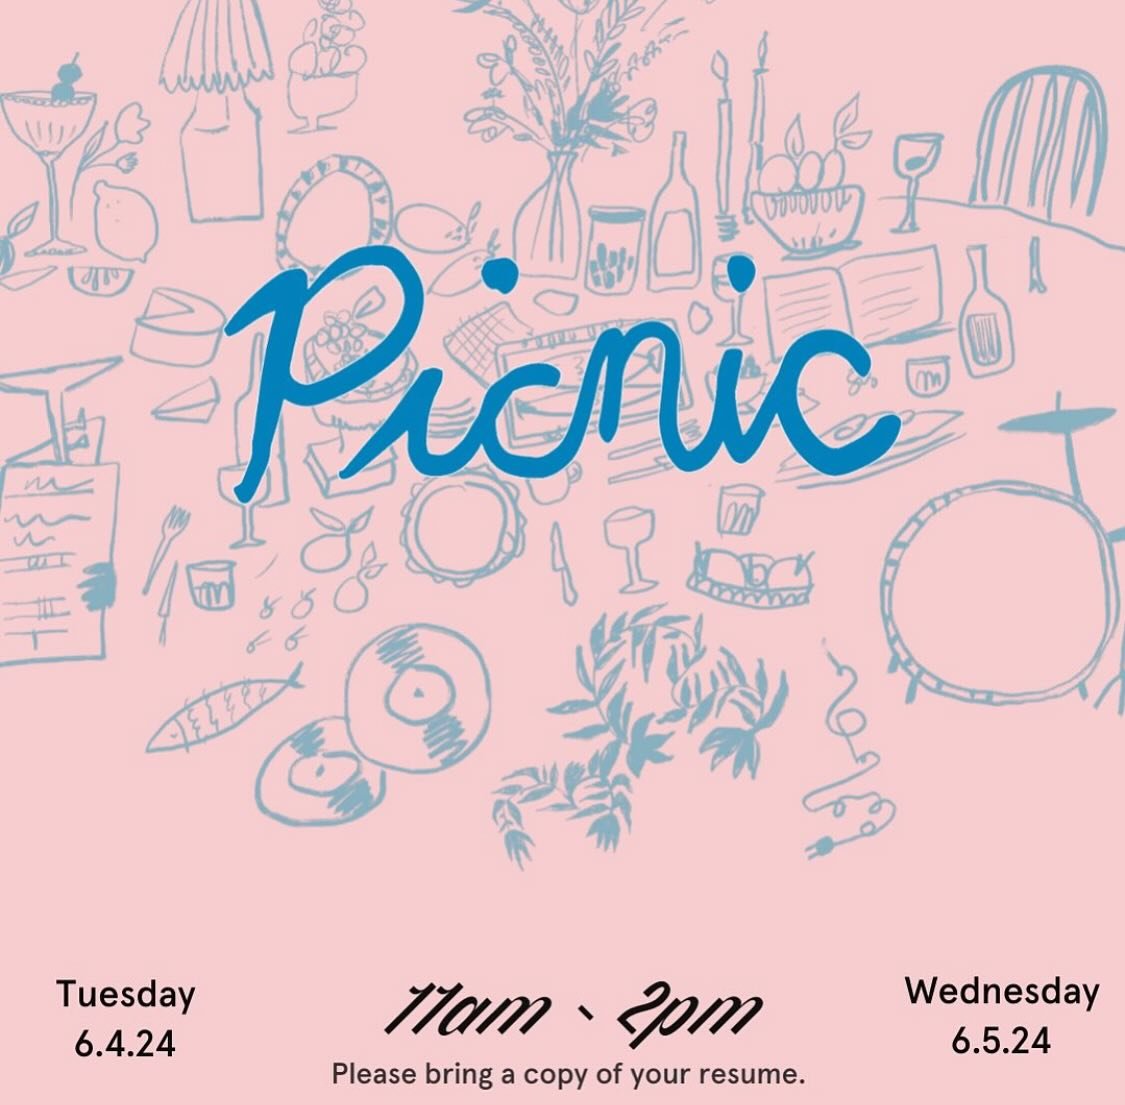 The Defined Hospitality family is growing! Join us this week for our job fair and come work at Picnic, our newest restaurant opening soon.